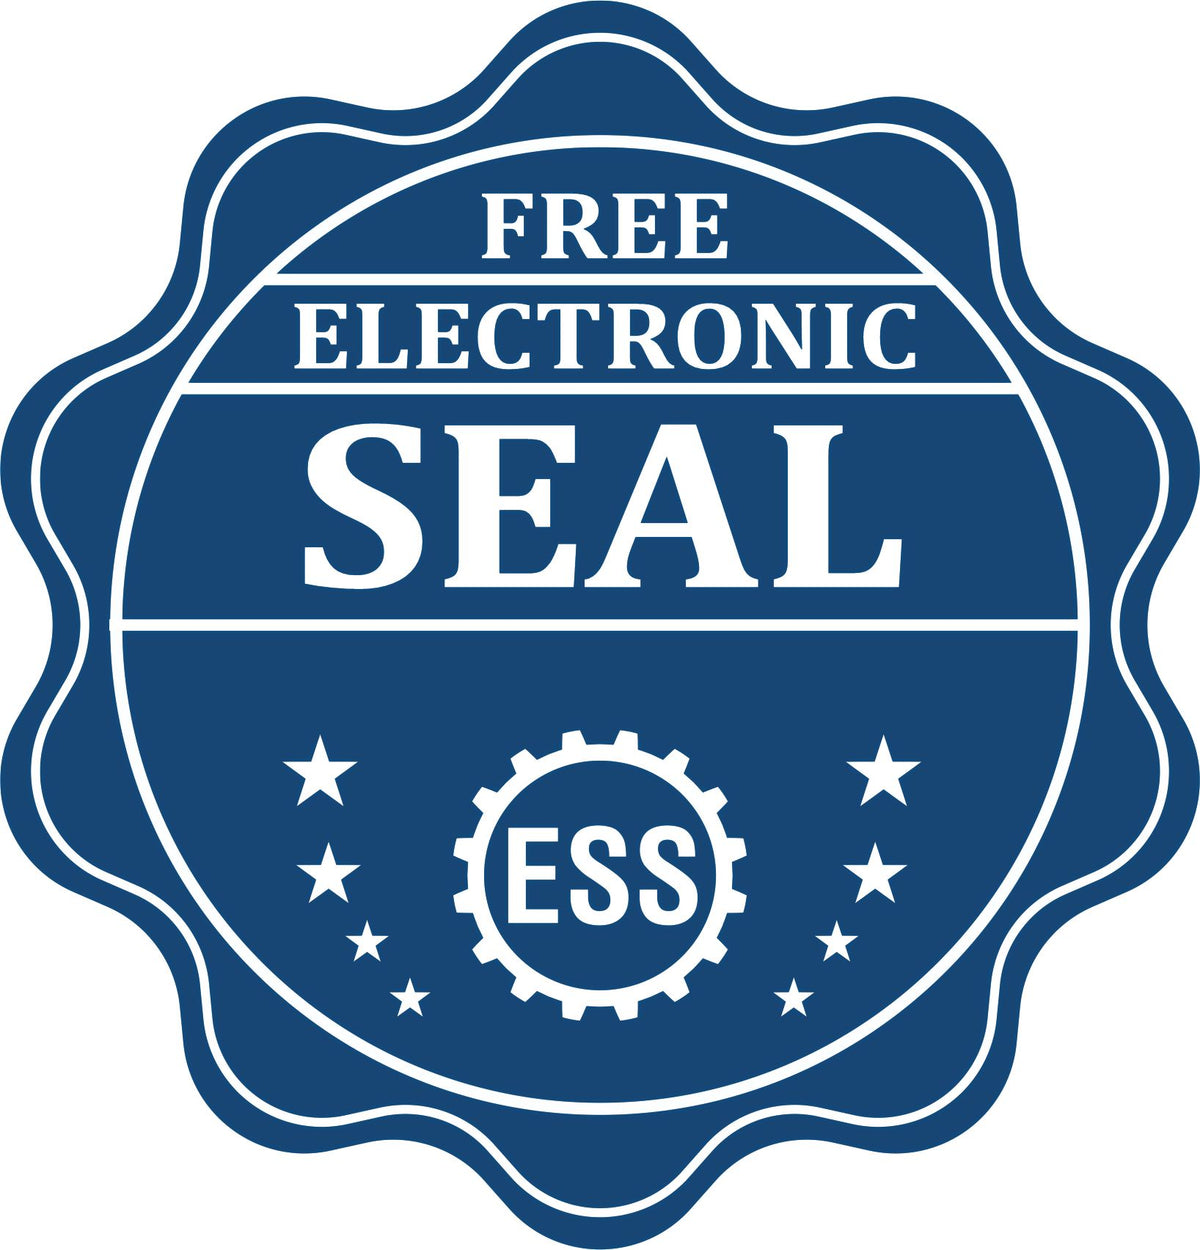 A badge showing a free electronic seal for the Slim Pre-Inked Kentucky Land Surveyor Seal Stamp with stars and the ESS gear on the emblem.